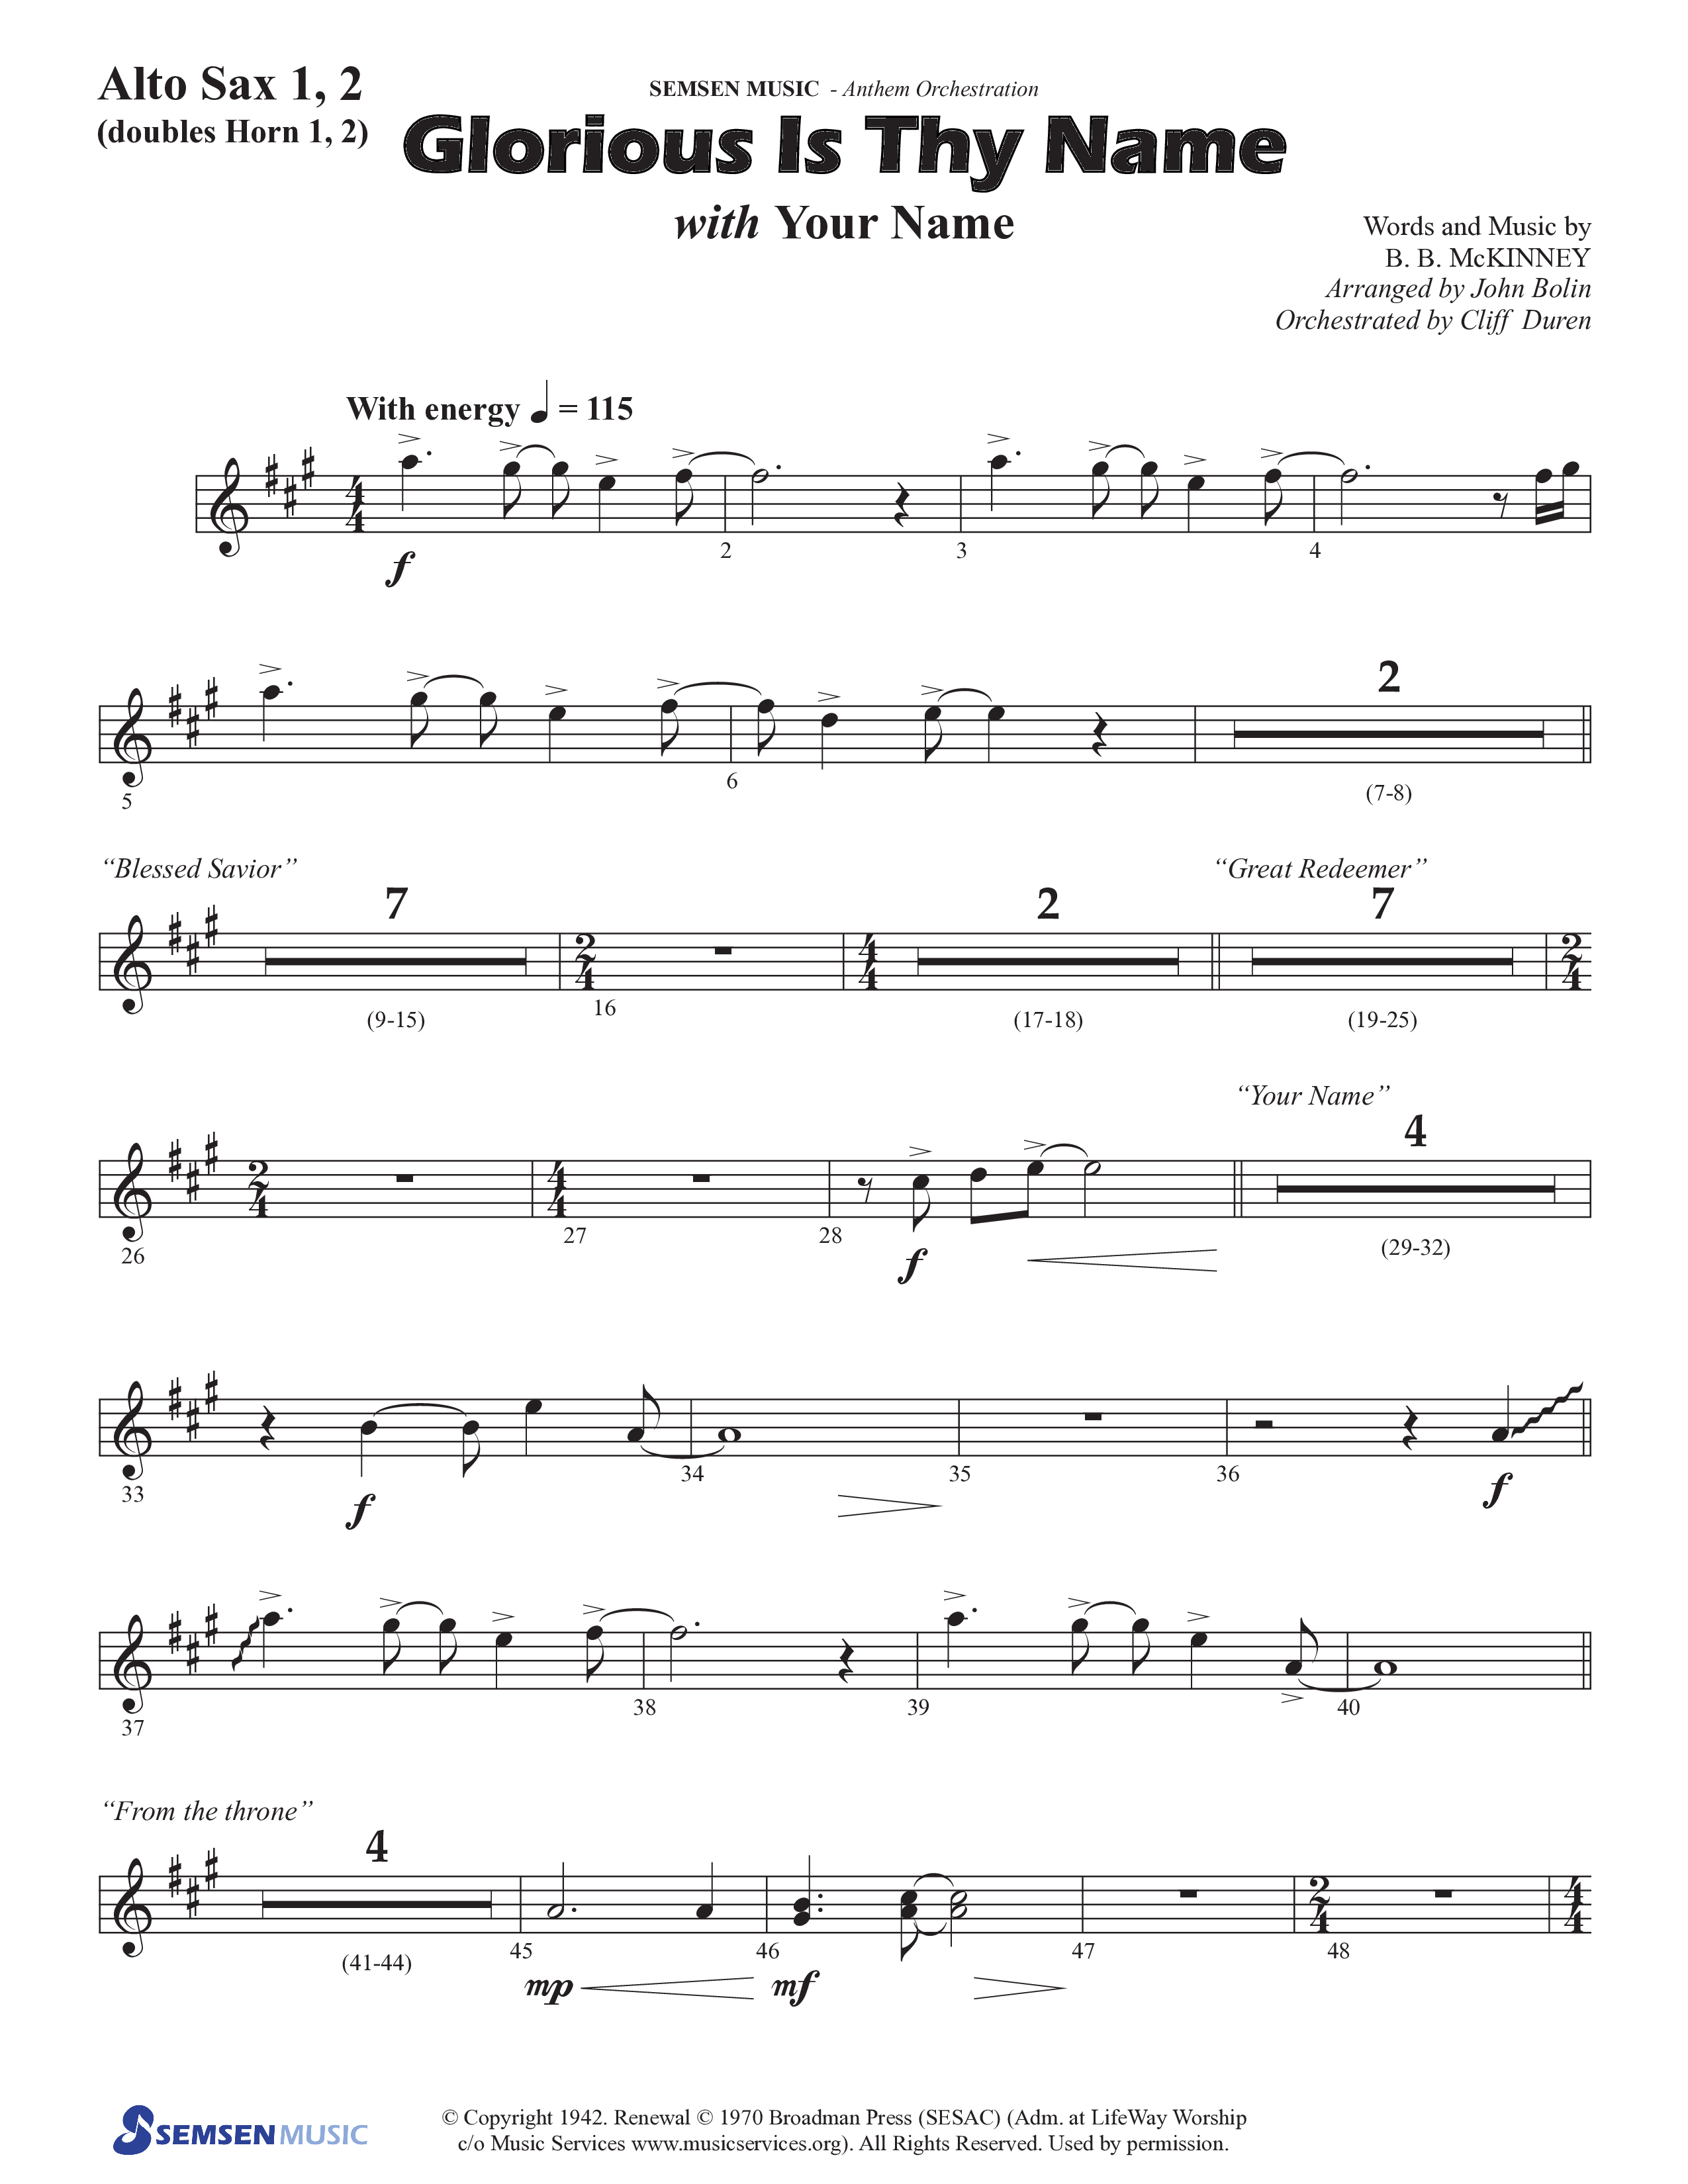 Glorious Is Thy Name (with Your Name) (Choral Anthem SATB) Alto Sax 1/2 (Semsen Music / Arr. John Bolin / Orch. Cliff Duren)